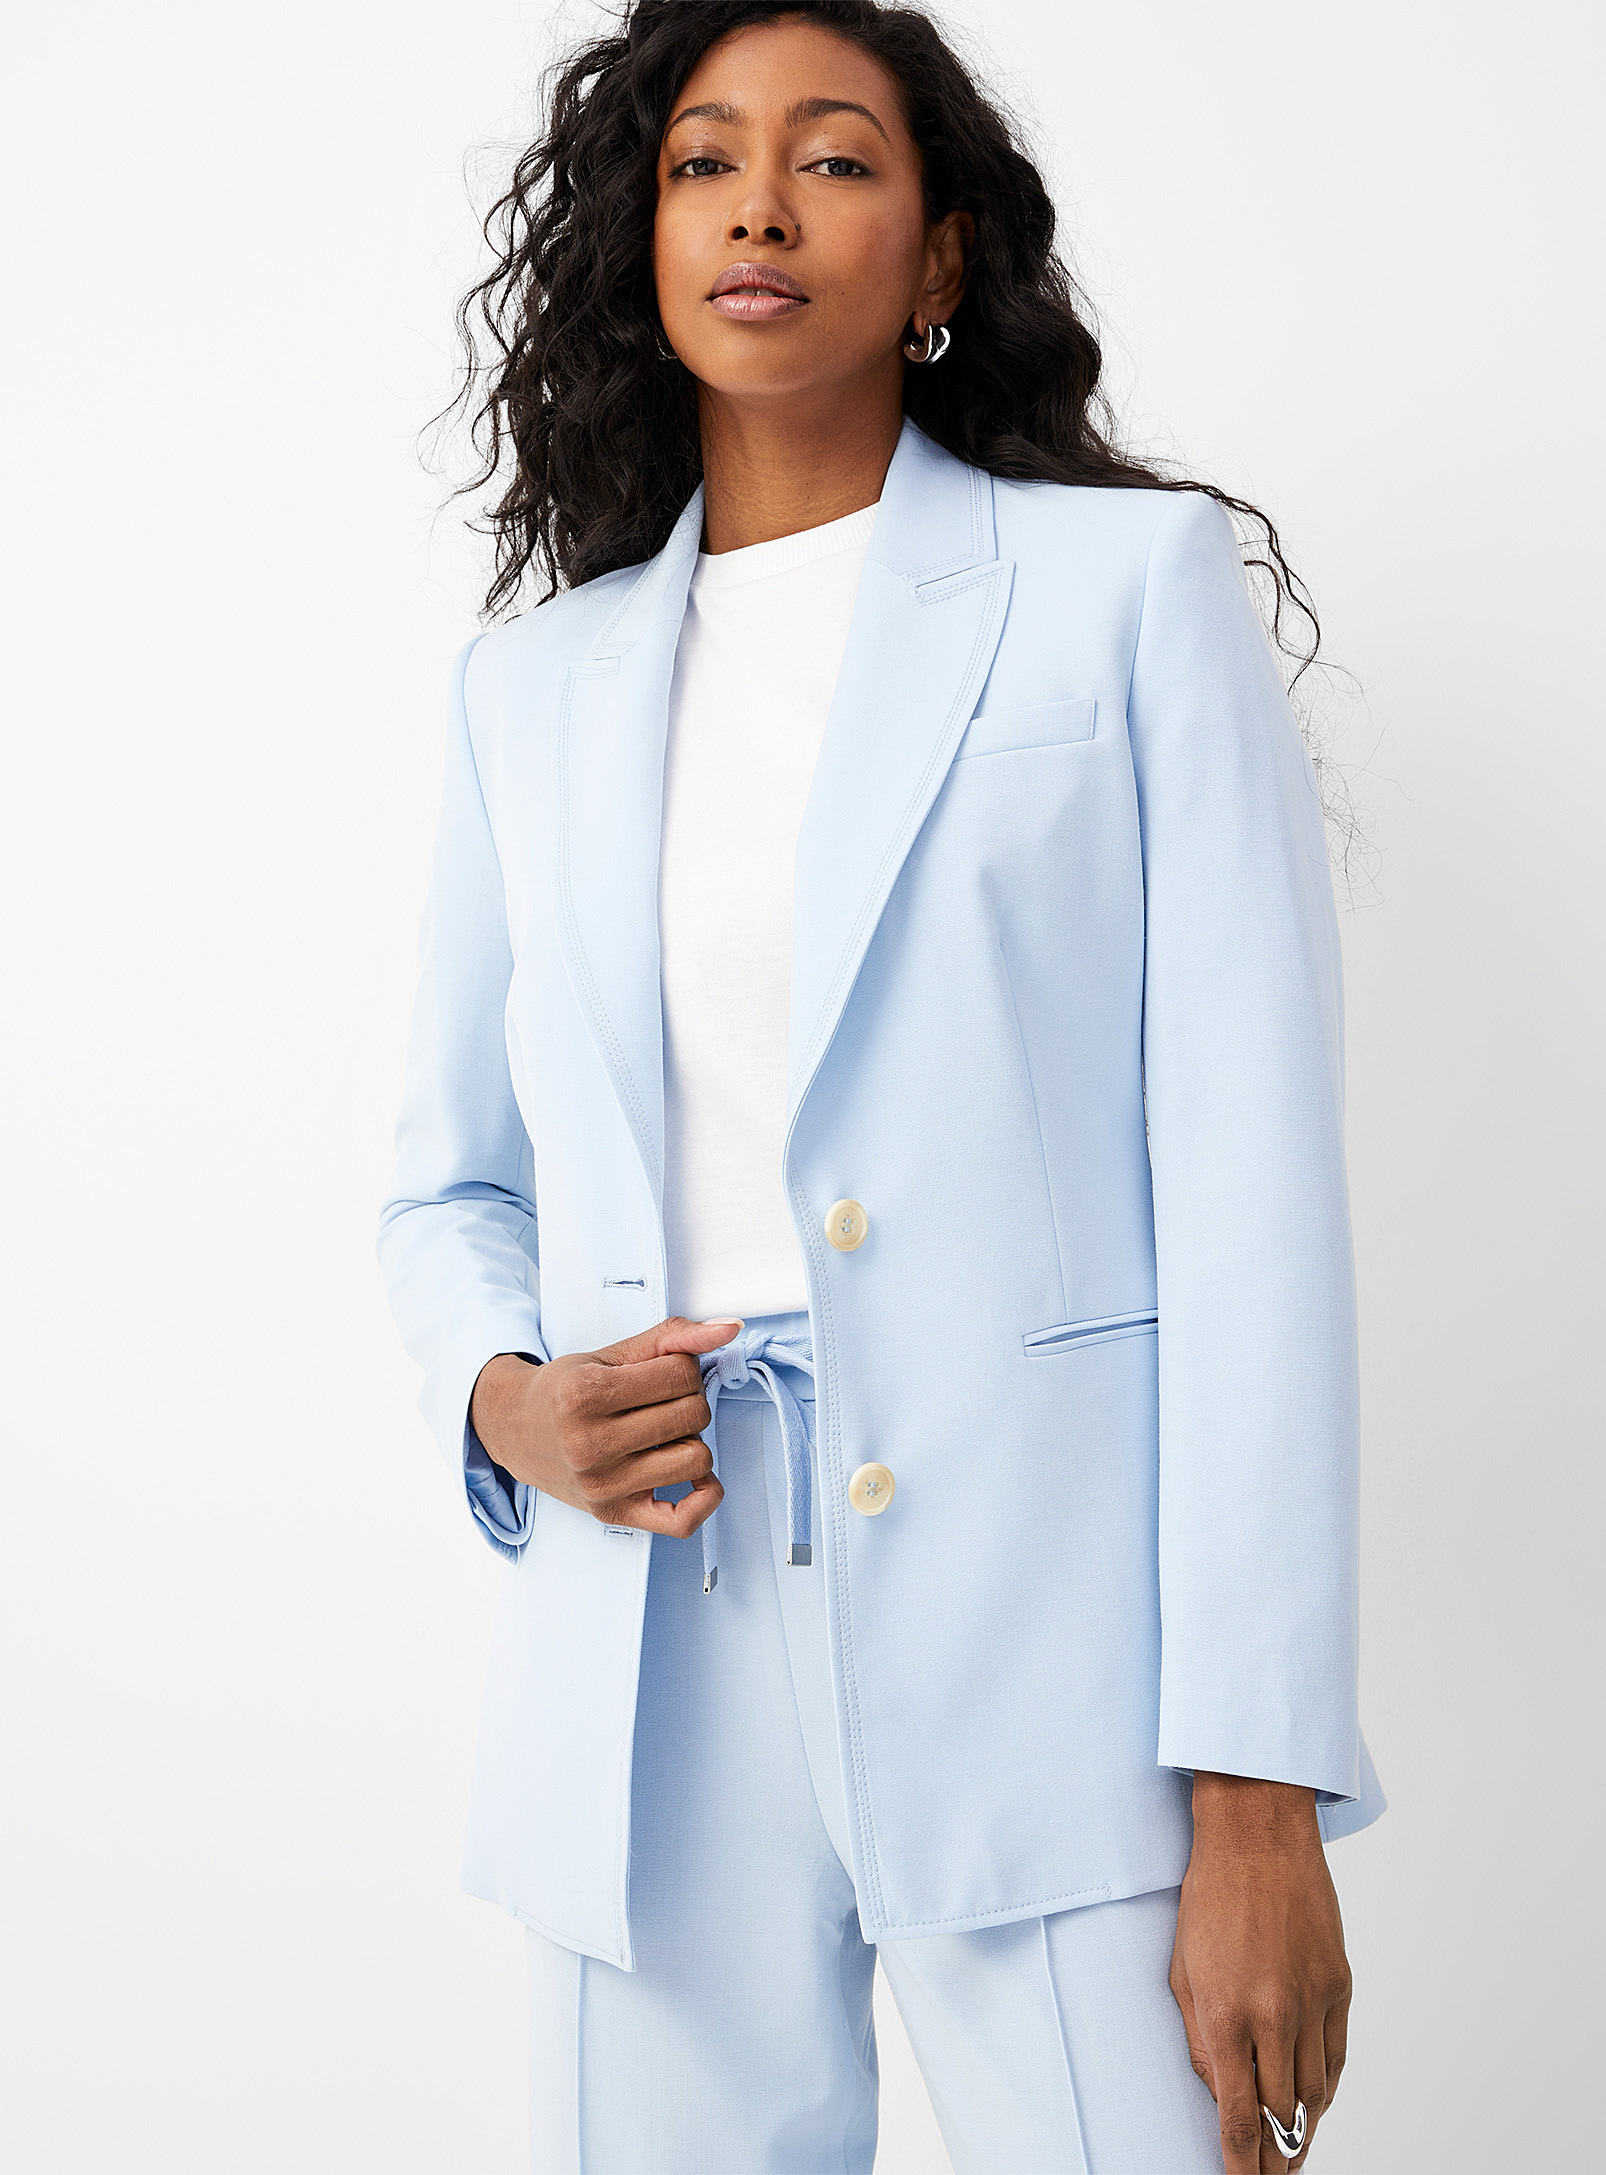 United Colors of Benetton - Women's Pastel blue fitted Blazer Jacket